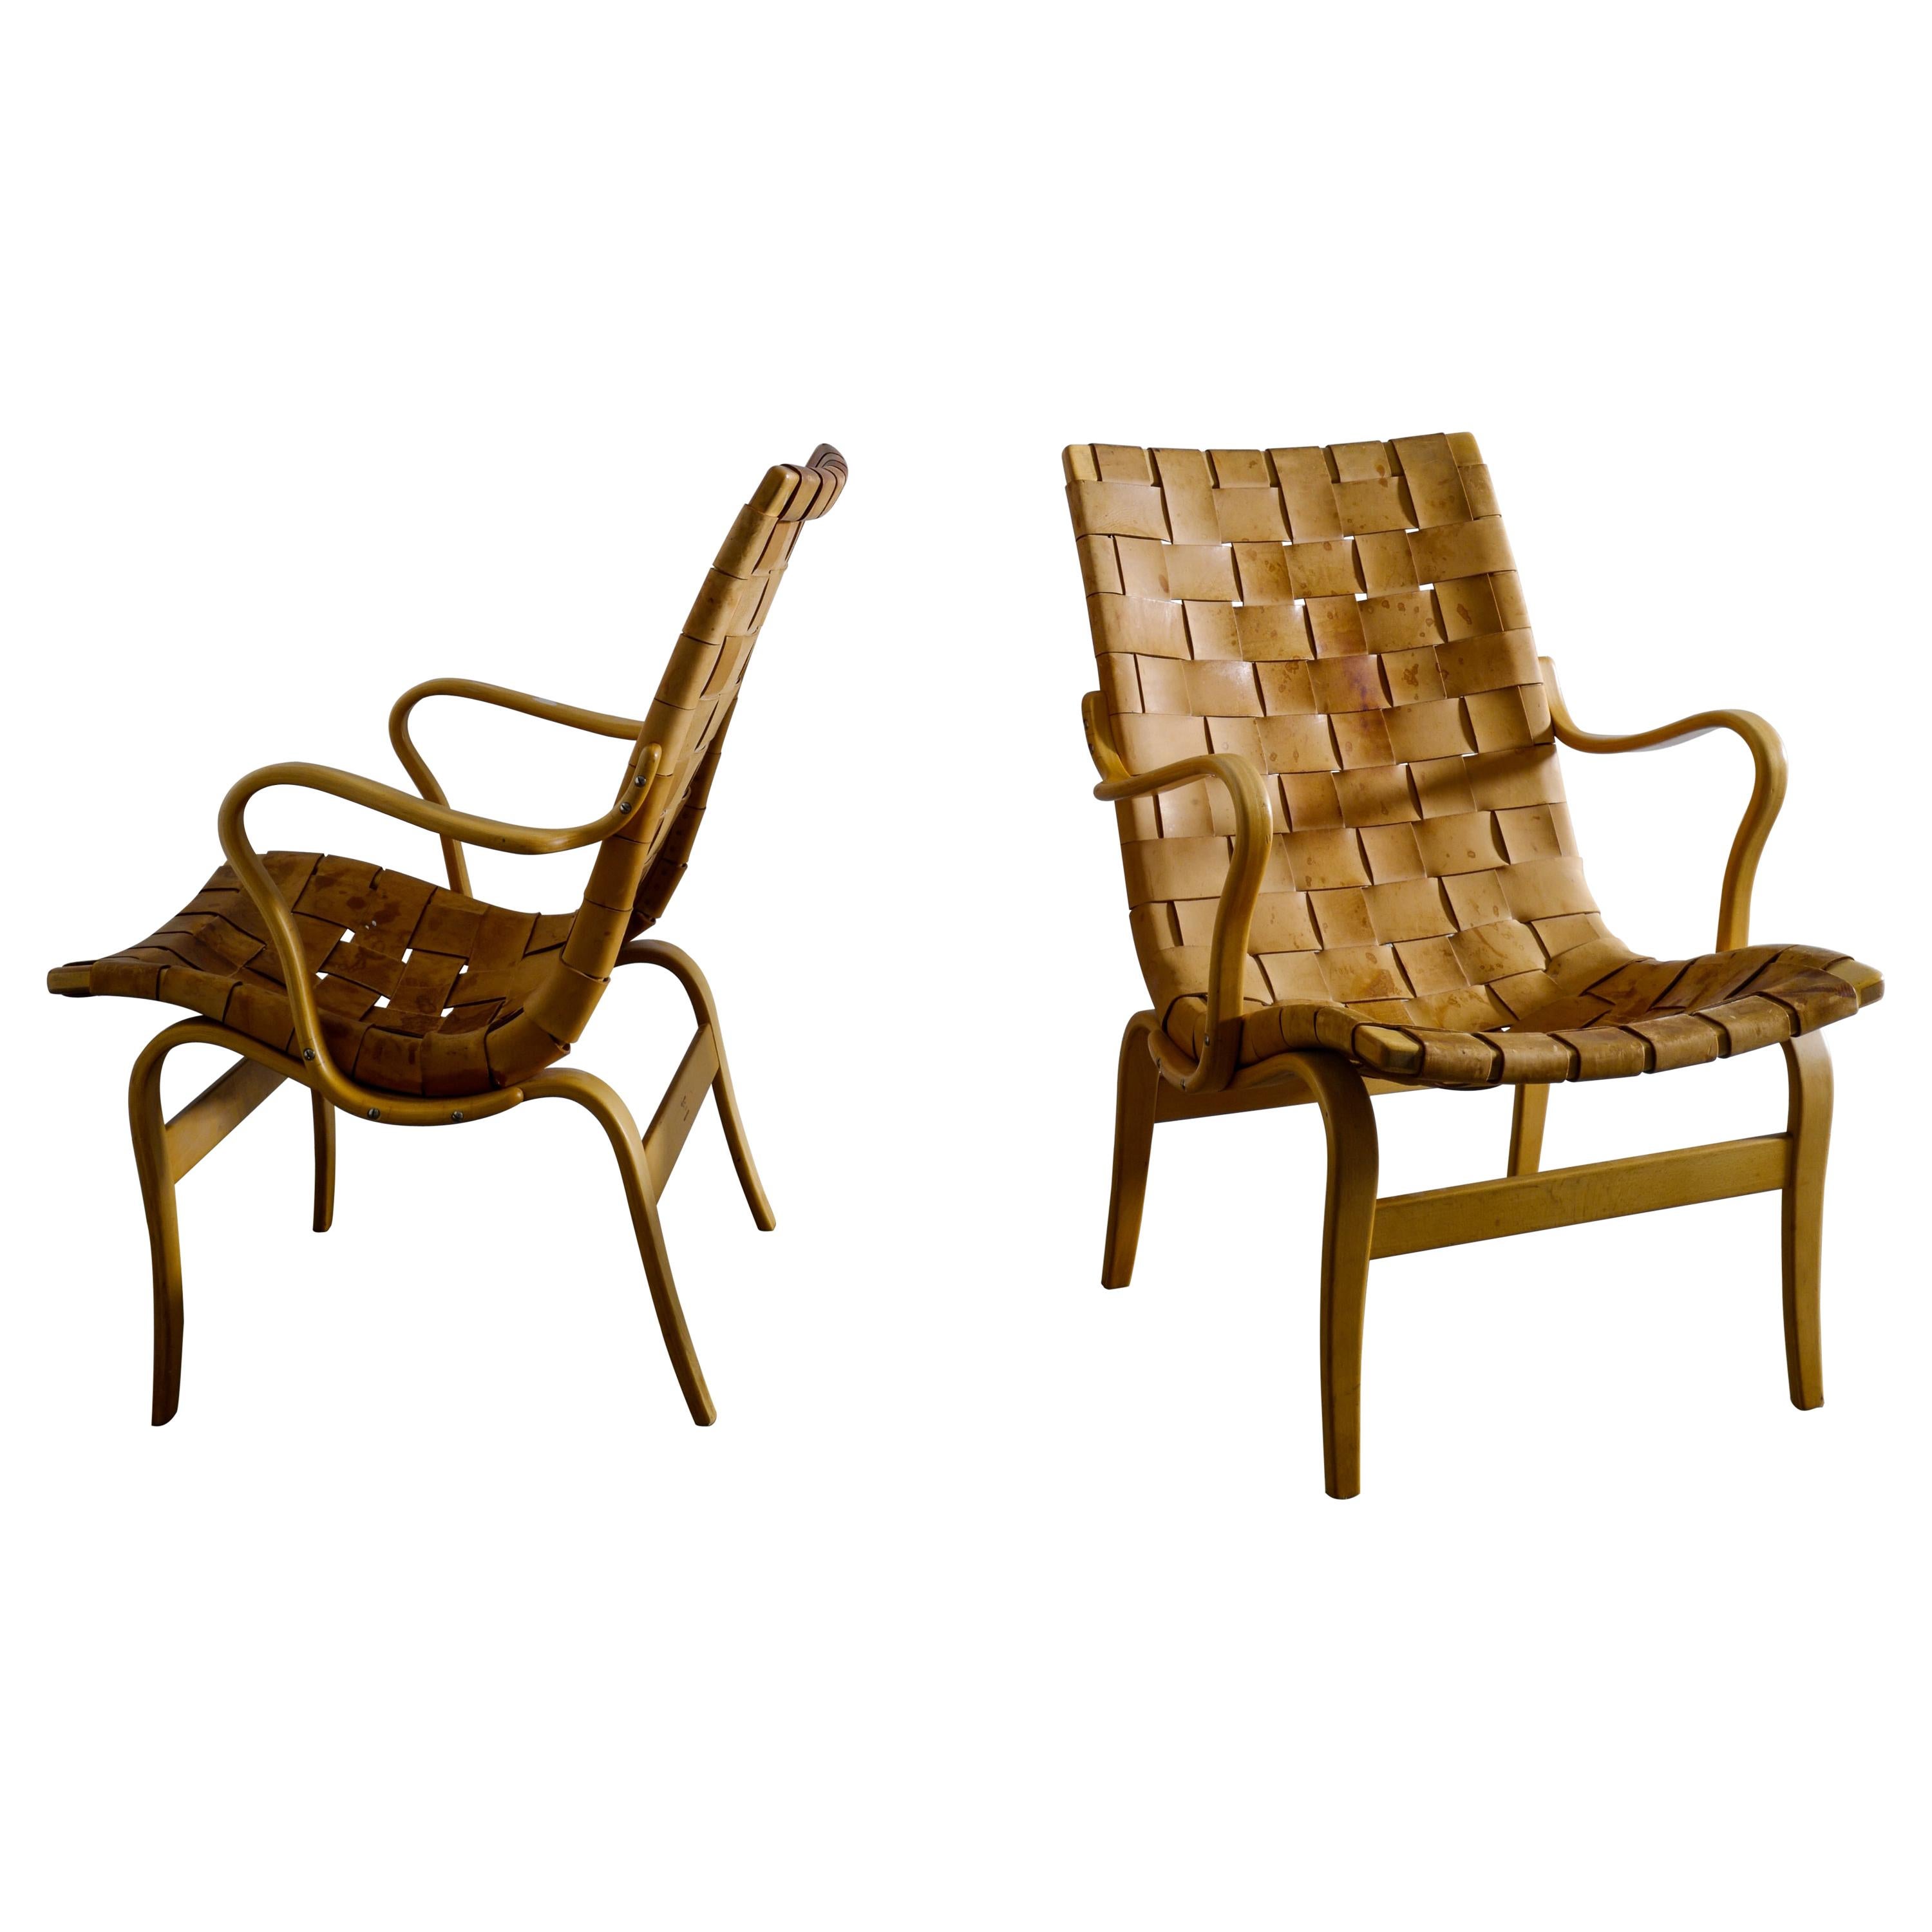 Pair of Bruno Mathsson "Eva" Easy Chairs in Brown Original Leather, Sweden 1960s